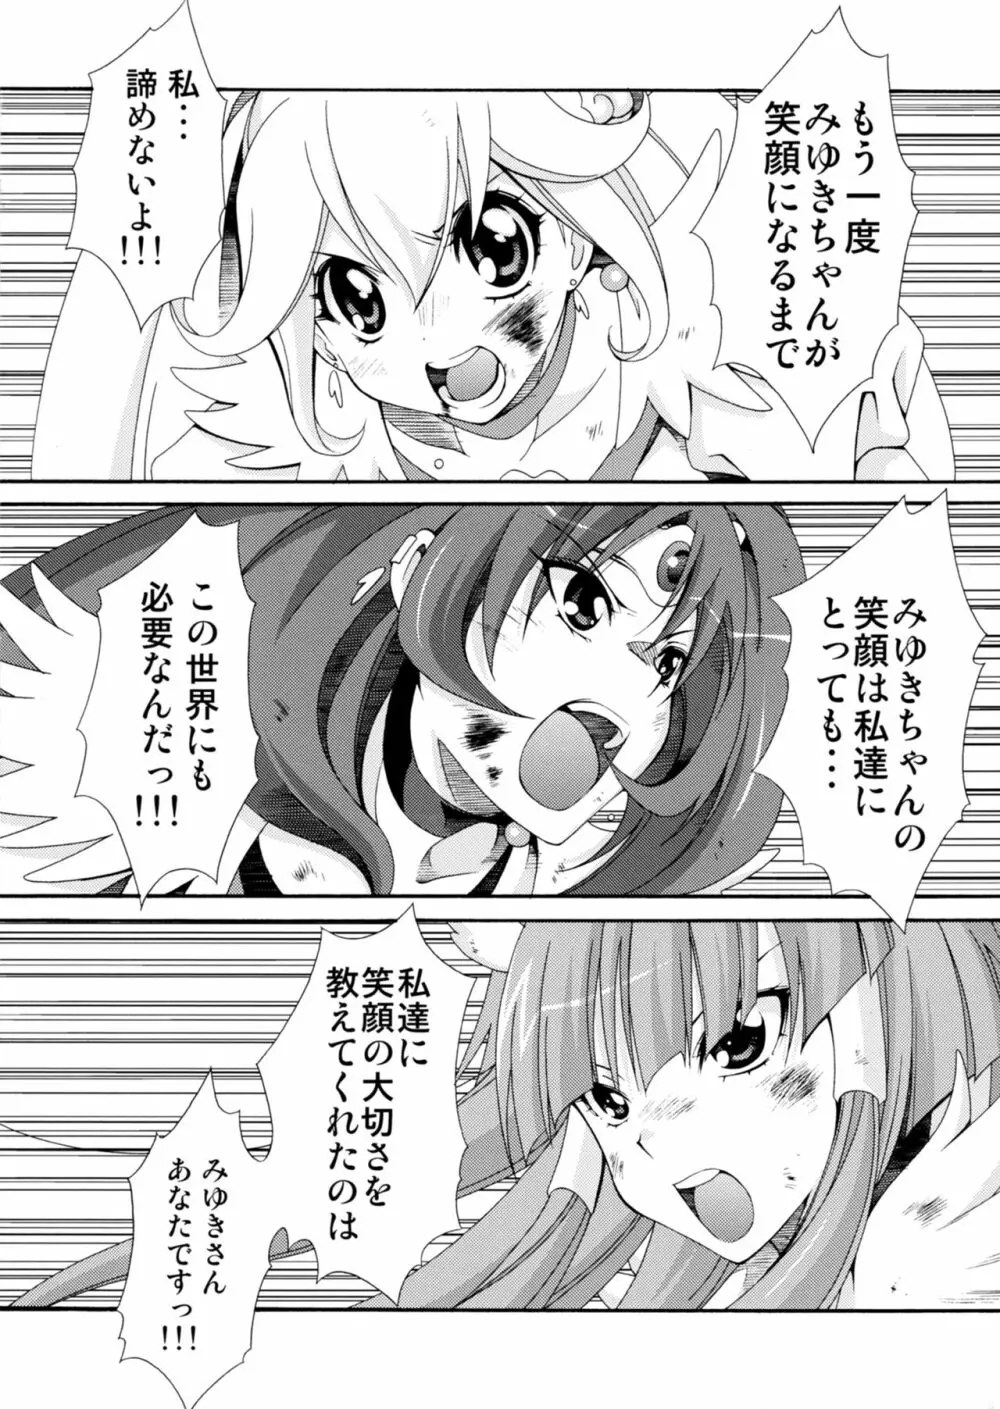 SMILES AND TEARS Vol.02 43ページ